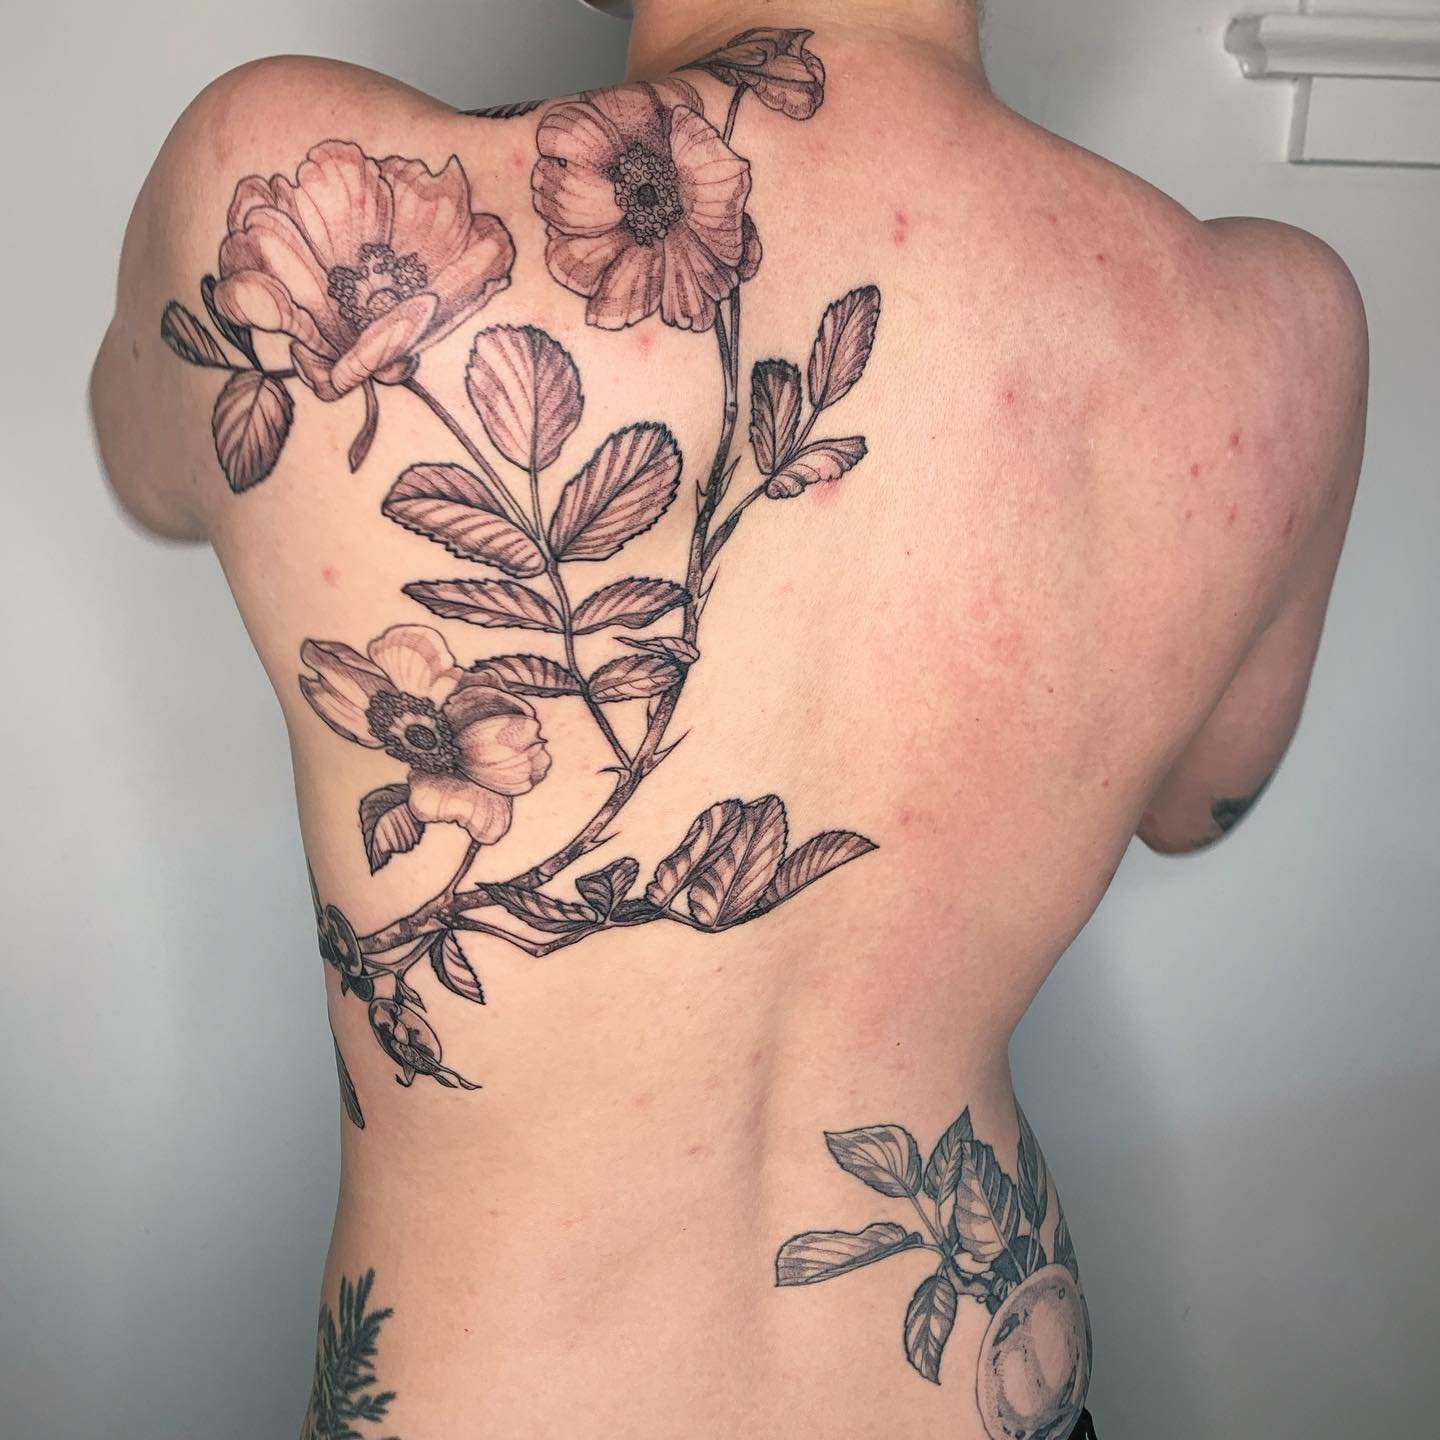 wrapping the body with Rosa
peak a healed apple branch on the opposing hip

#RoseTattoo #ShoulderTattoo #ContemporaryTattoo #ContemporaryTattooing #BotanicalTattoo #BotanicalTattoos #BotanicalTattooArtist #TattooInspo #tattooinspiration #YVRTattoo #Y